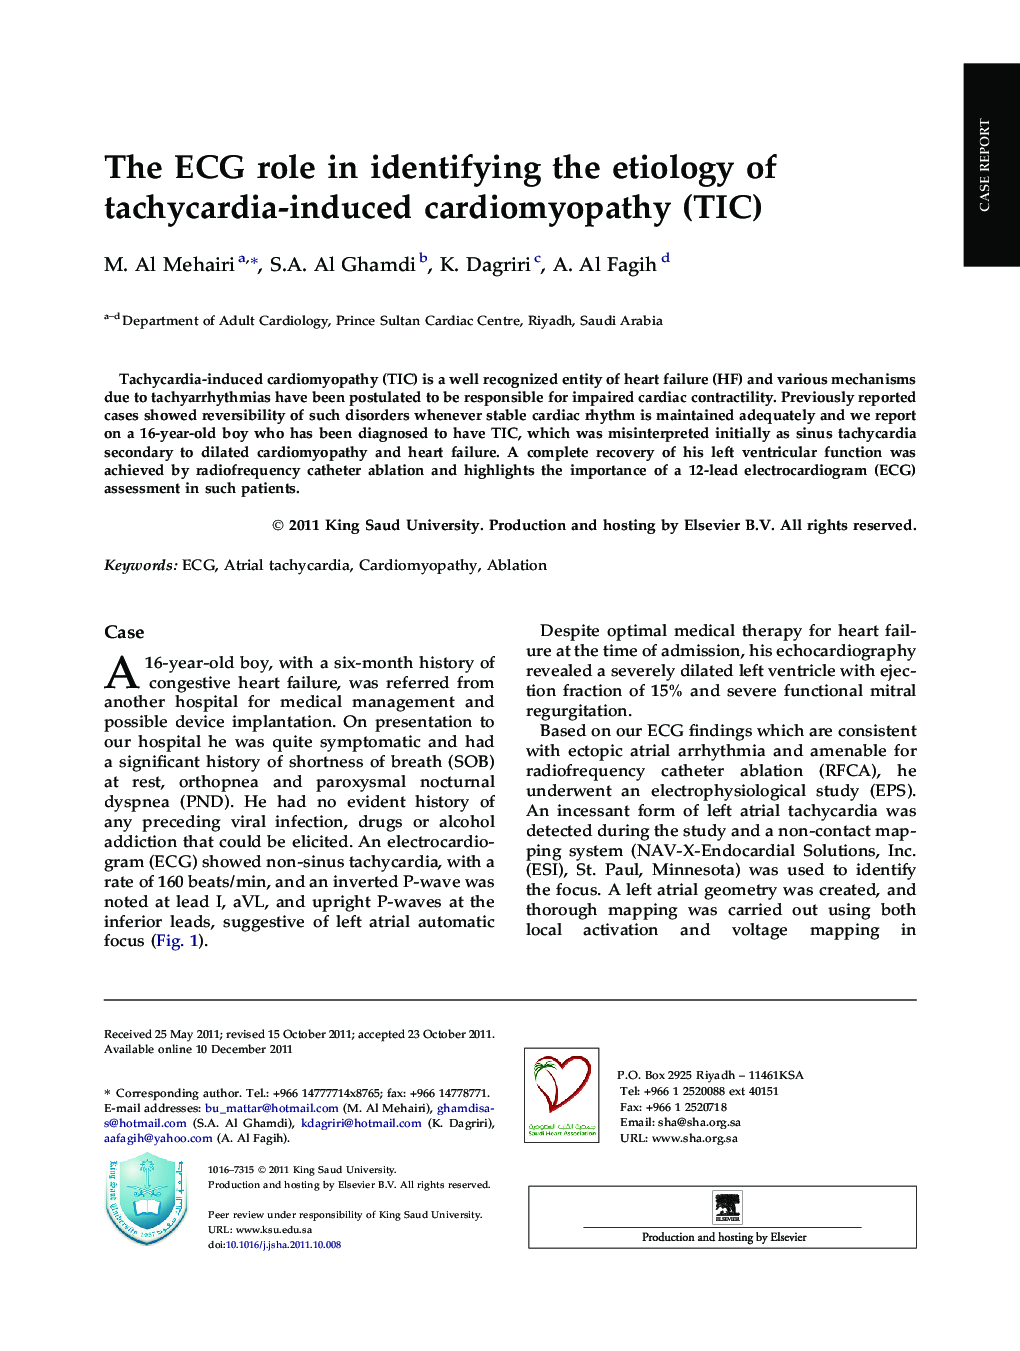 The ECG role in identifying the etiology of tachycardia-induced cardiomyopathy (TIC)